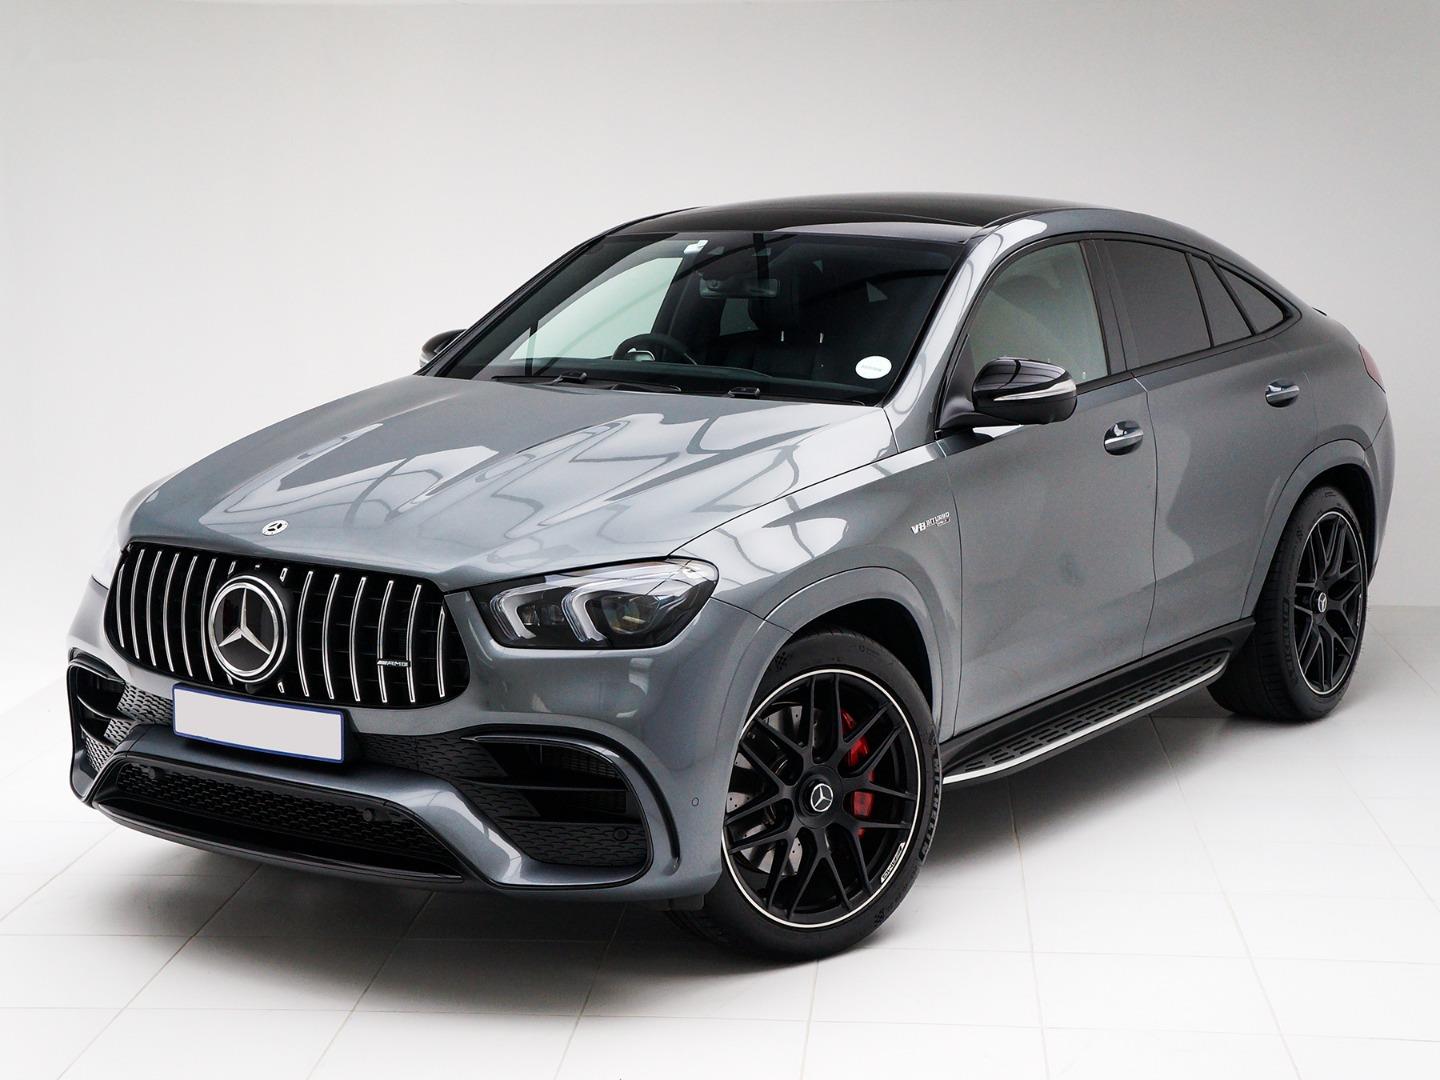 MercedesAMG GLE 63 S Coupe 4Matic+ (2021) review A fashionably late